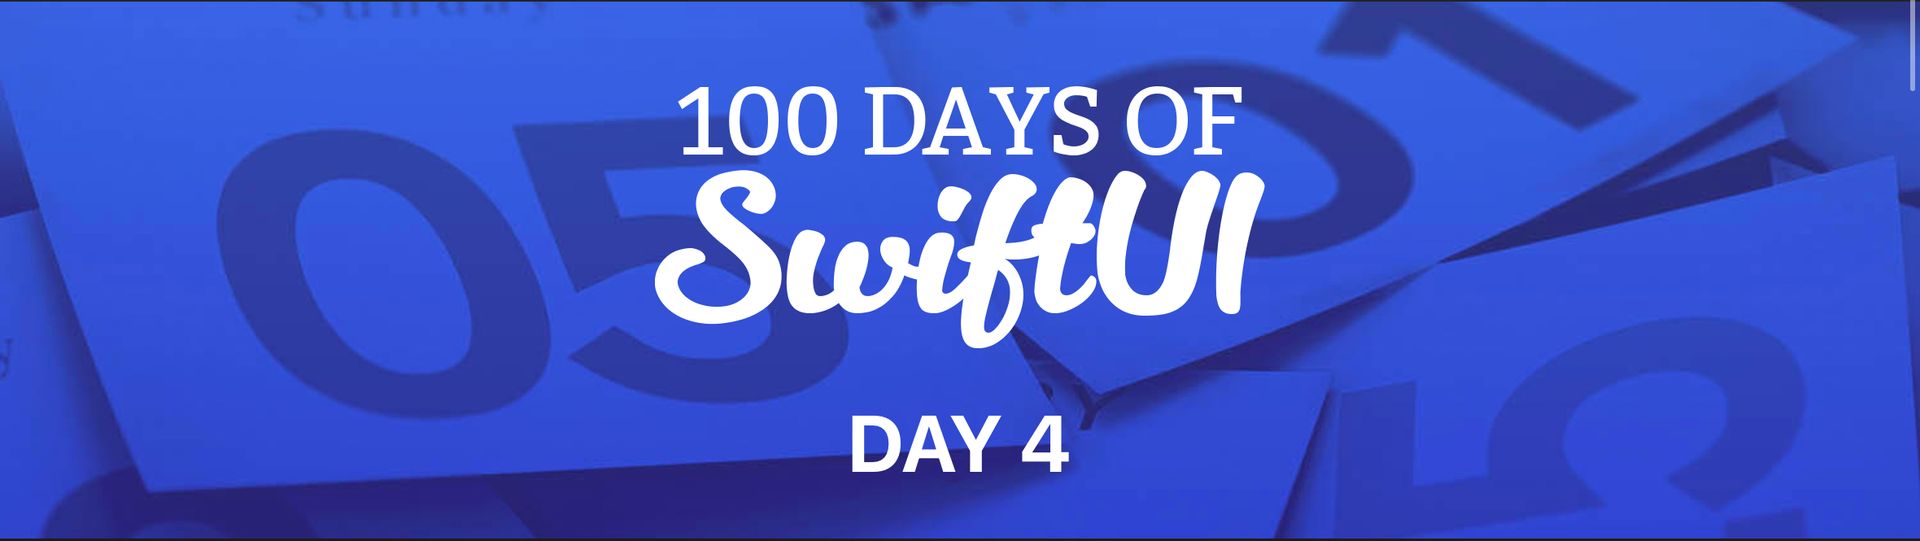 100 Days of SwiftUI - Day 4